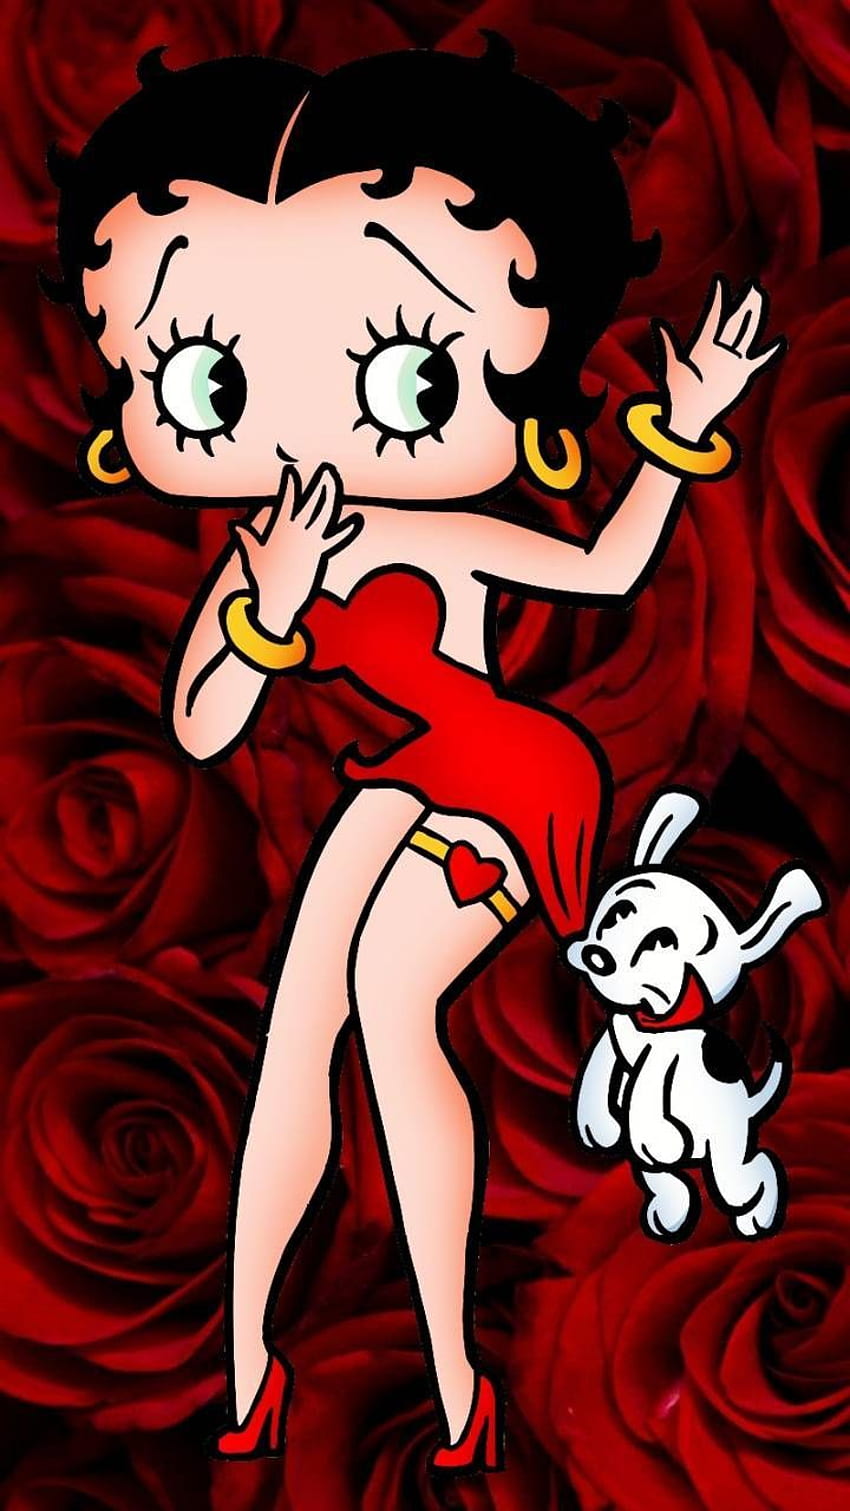 Betty Boop red rose by Glendalizz69 - 72 - on ZEDGE™ now. Browse millions of popu in 2020. Betty boop art, Betty boop cartoon, Betty boop, Black Betty Boop HD phone wallpaper